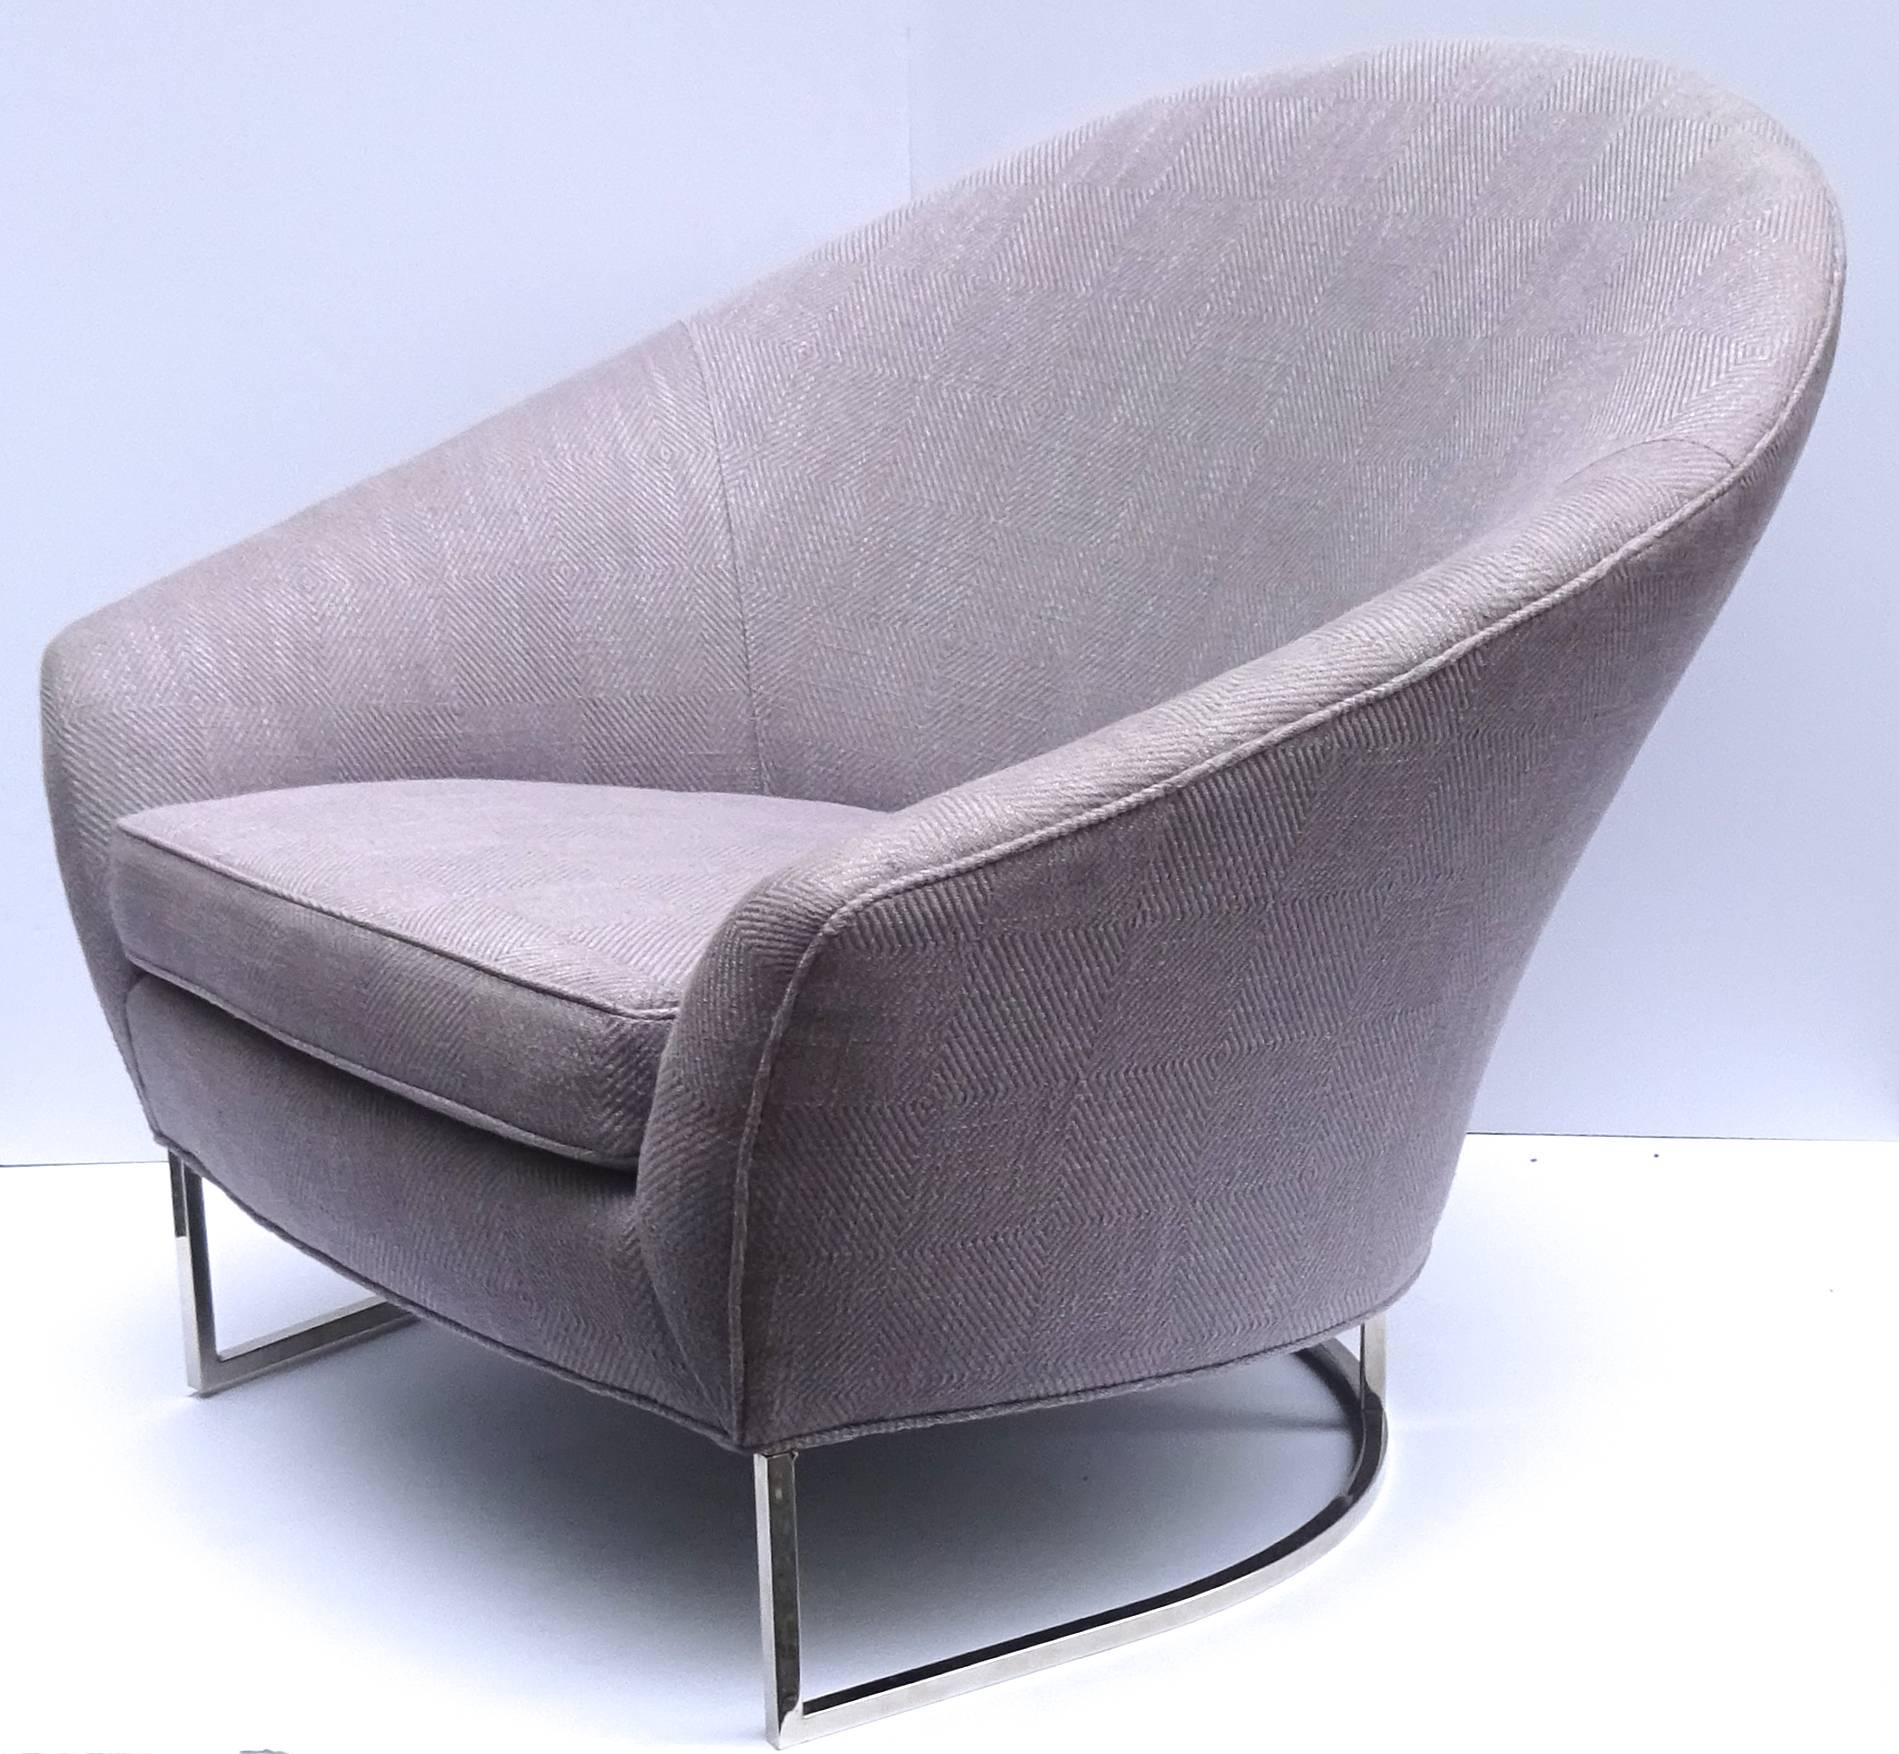 Late 20th Century Large Sculptural 1970s Milo Baughman Lounge Chair For Sale